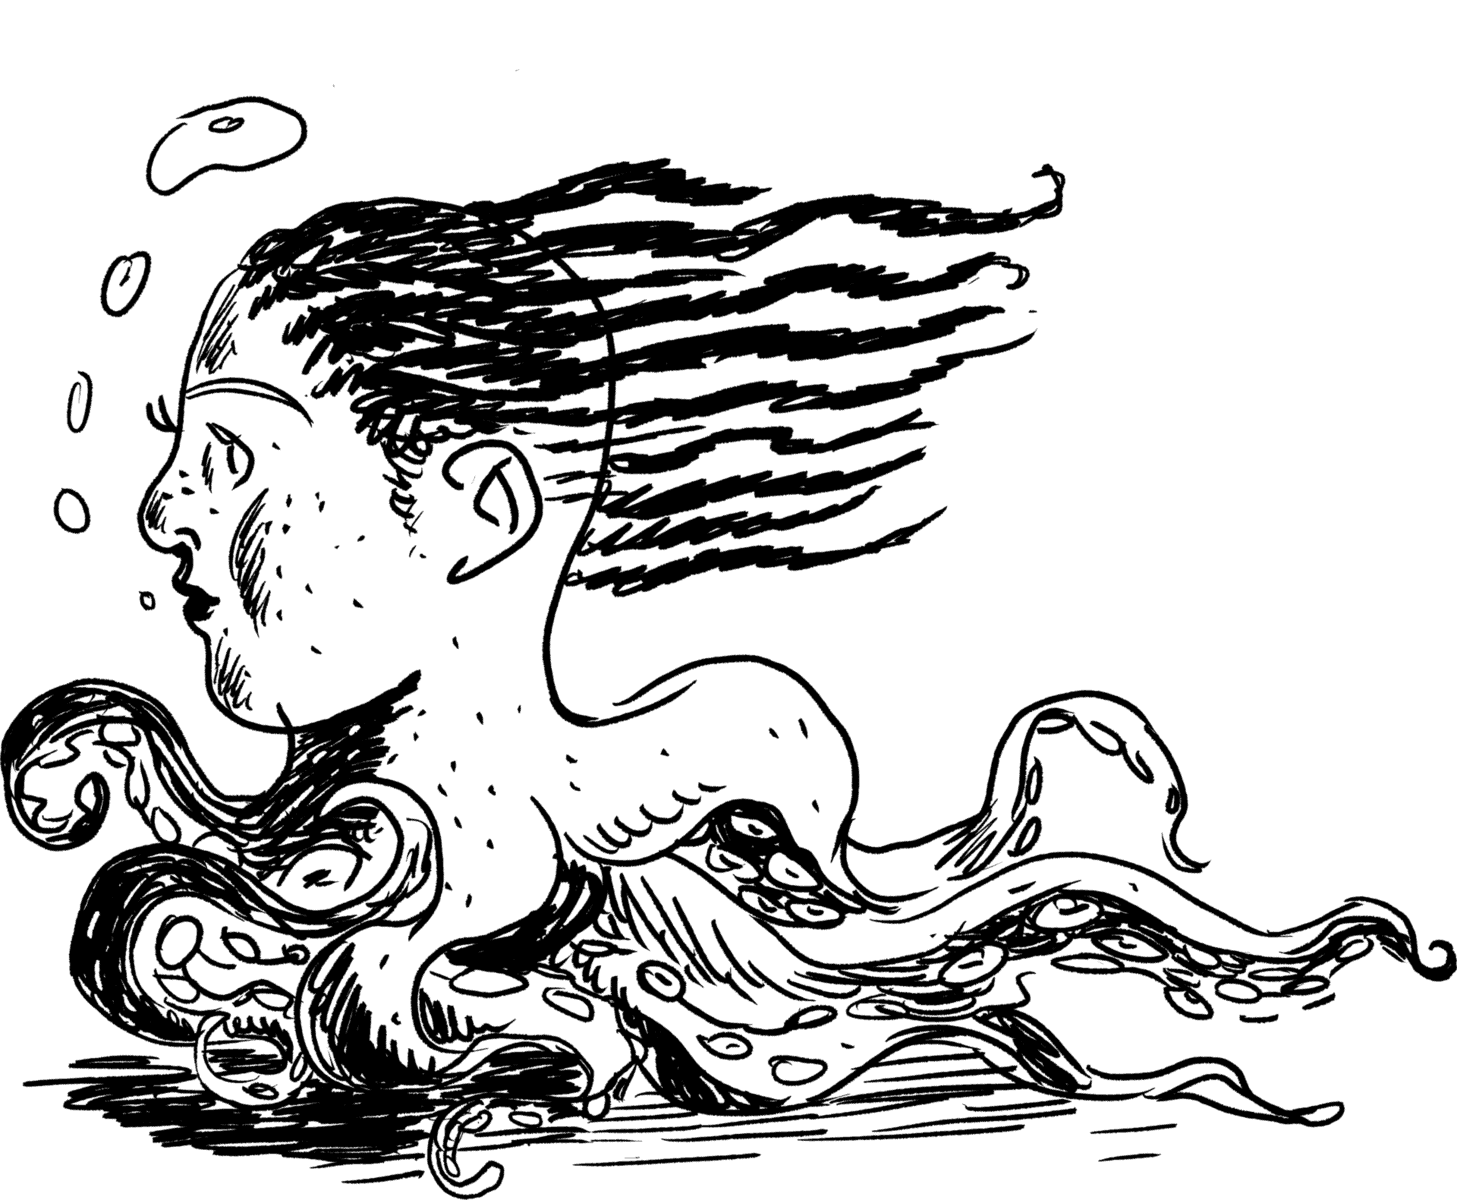 An octopus with a human head and tentacle body.